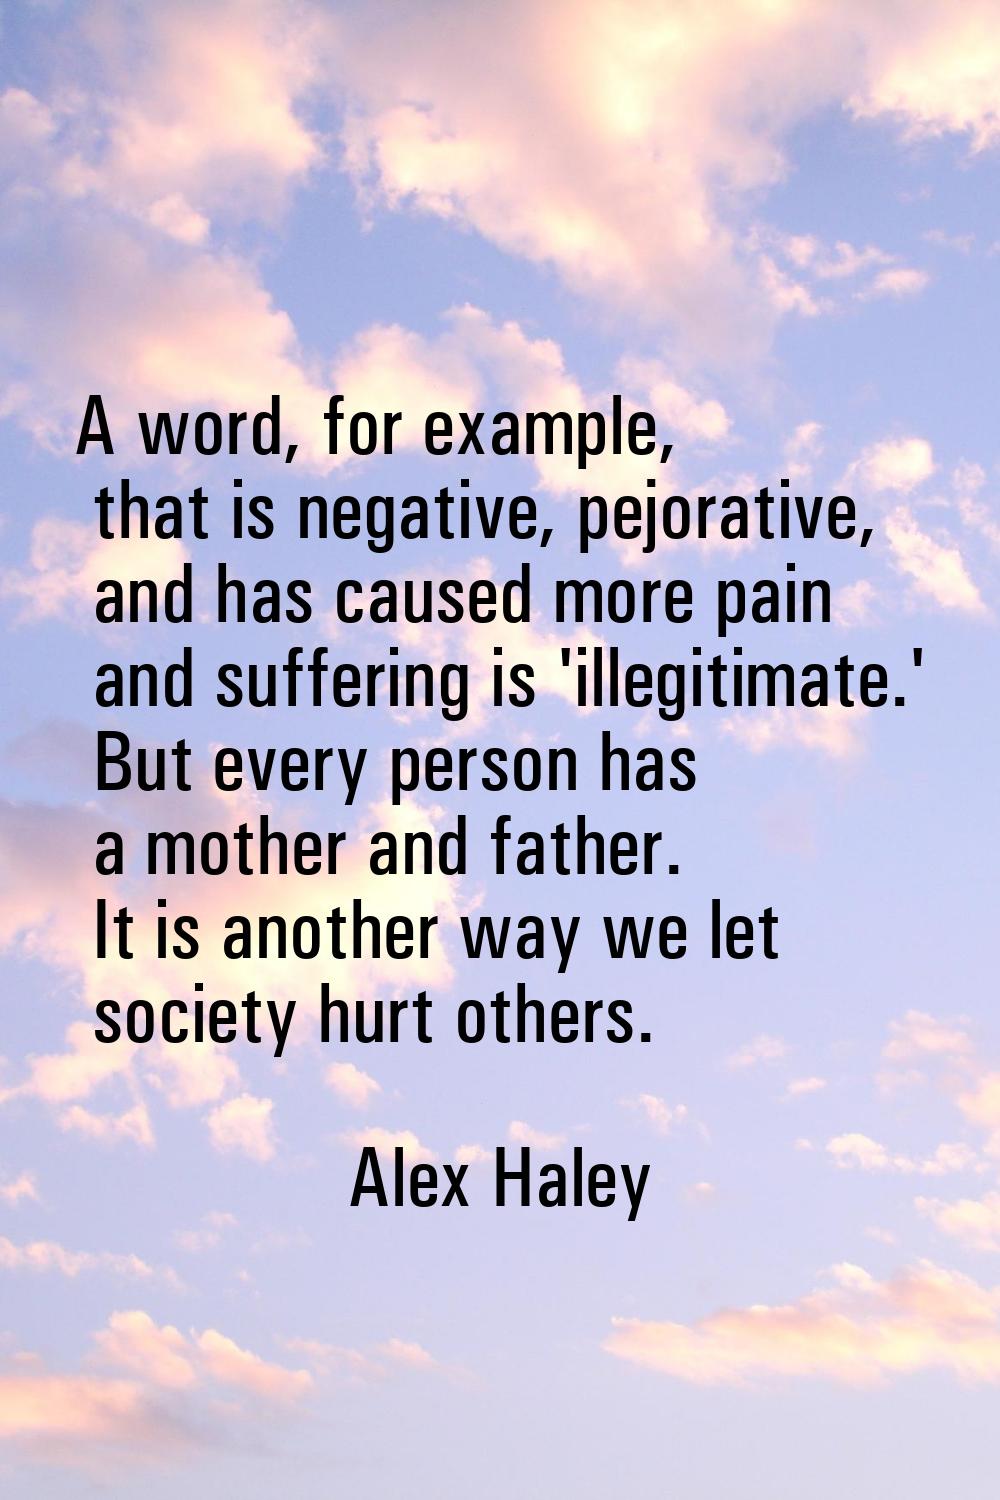 A word, for example, that is negative, pejorative, and has caused more pain and suffering is 'illeg